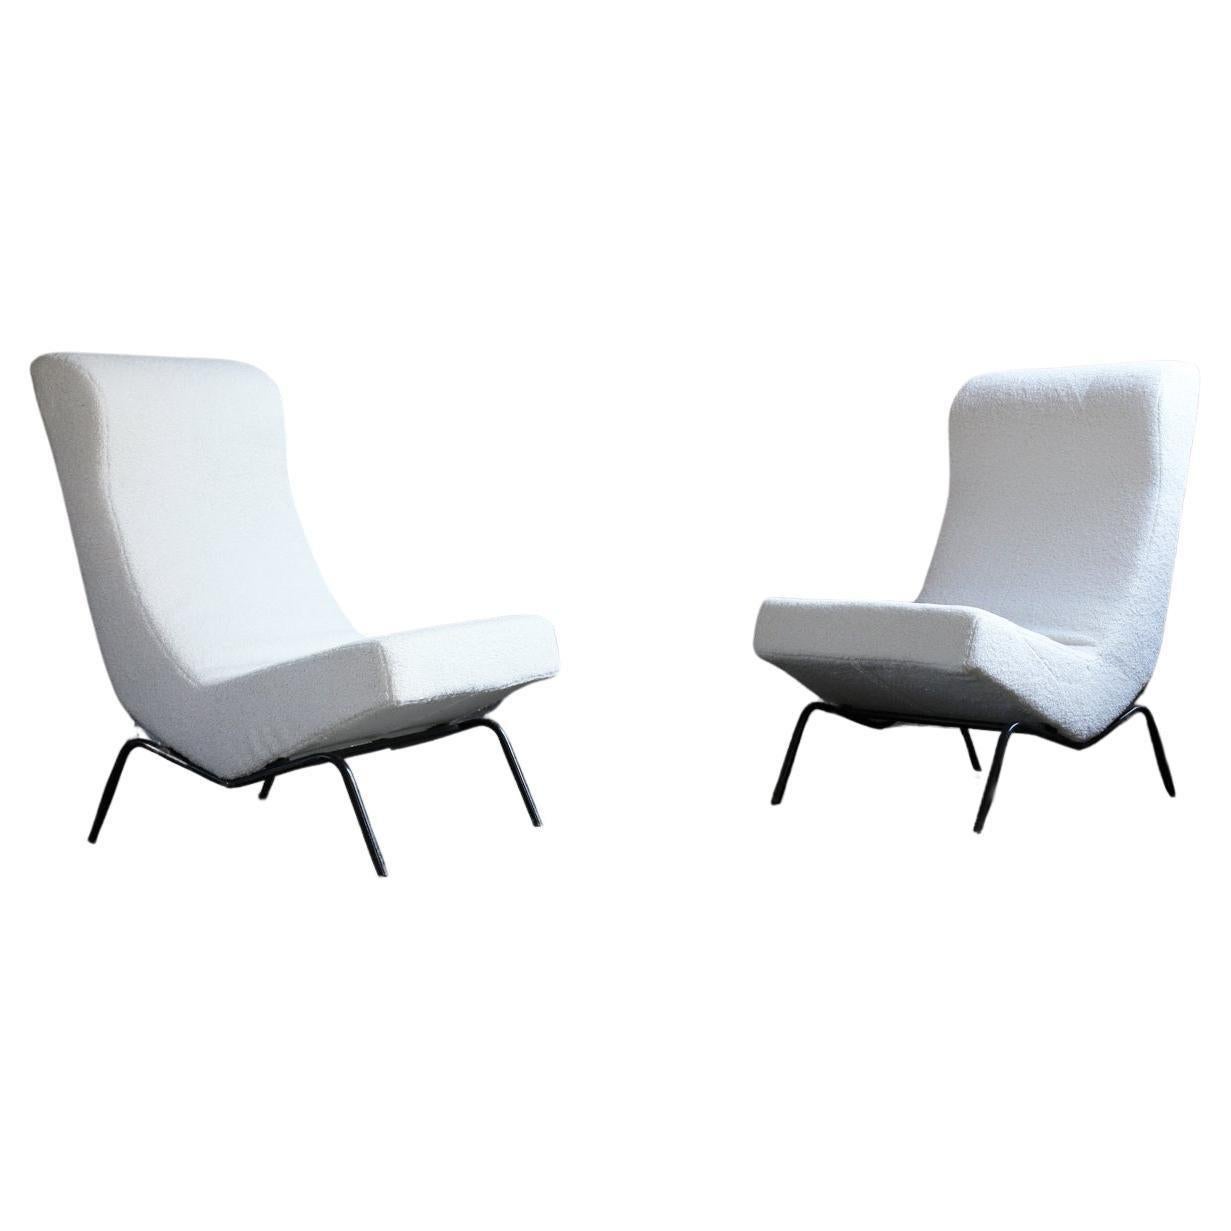 CM194 Low Chairs – high back – by Pierre Paulin for Thonet around 1959s